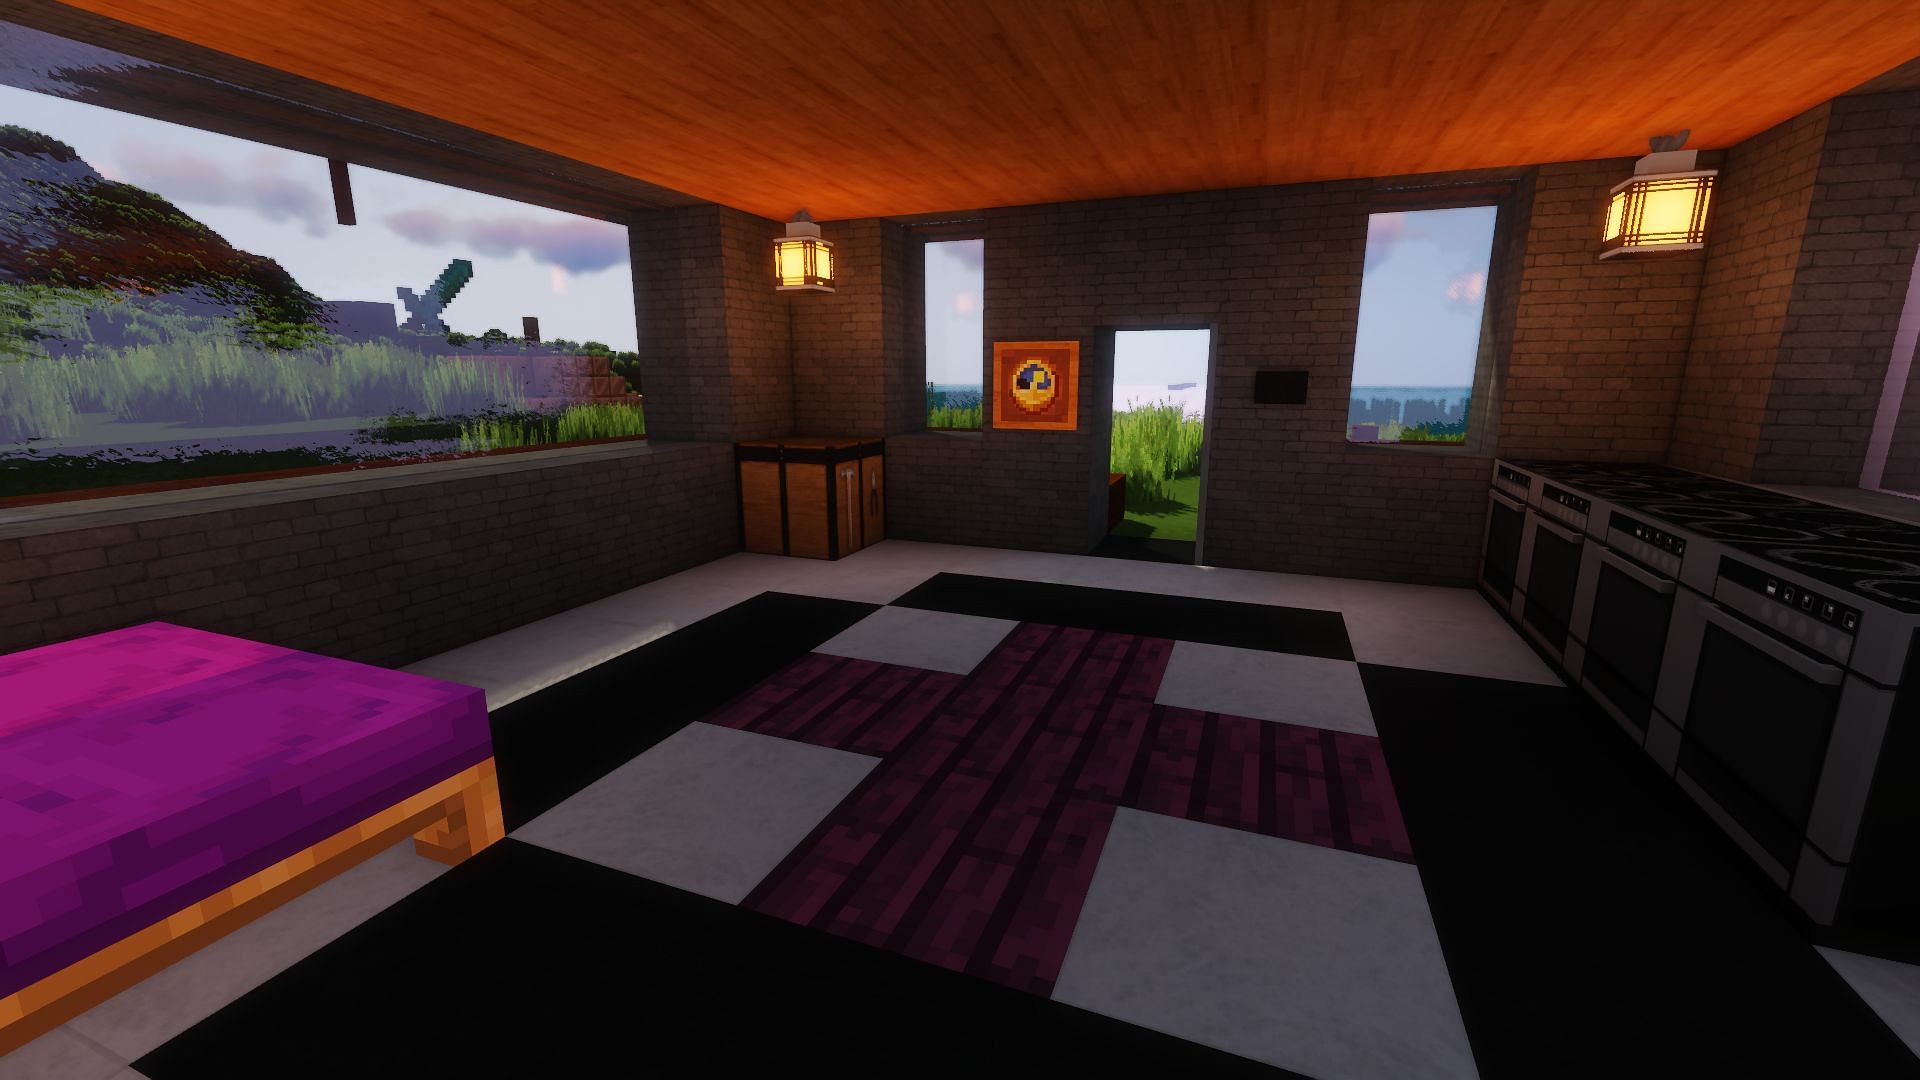 The build with the ModernArch texture pack (Image via Minecraft)